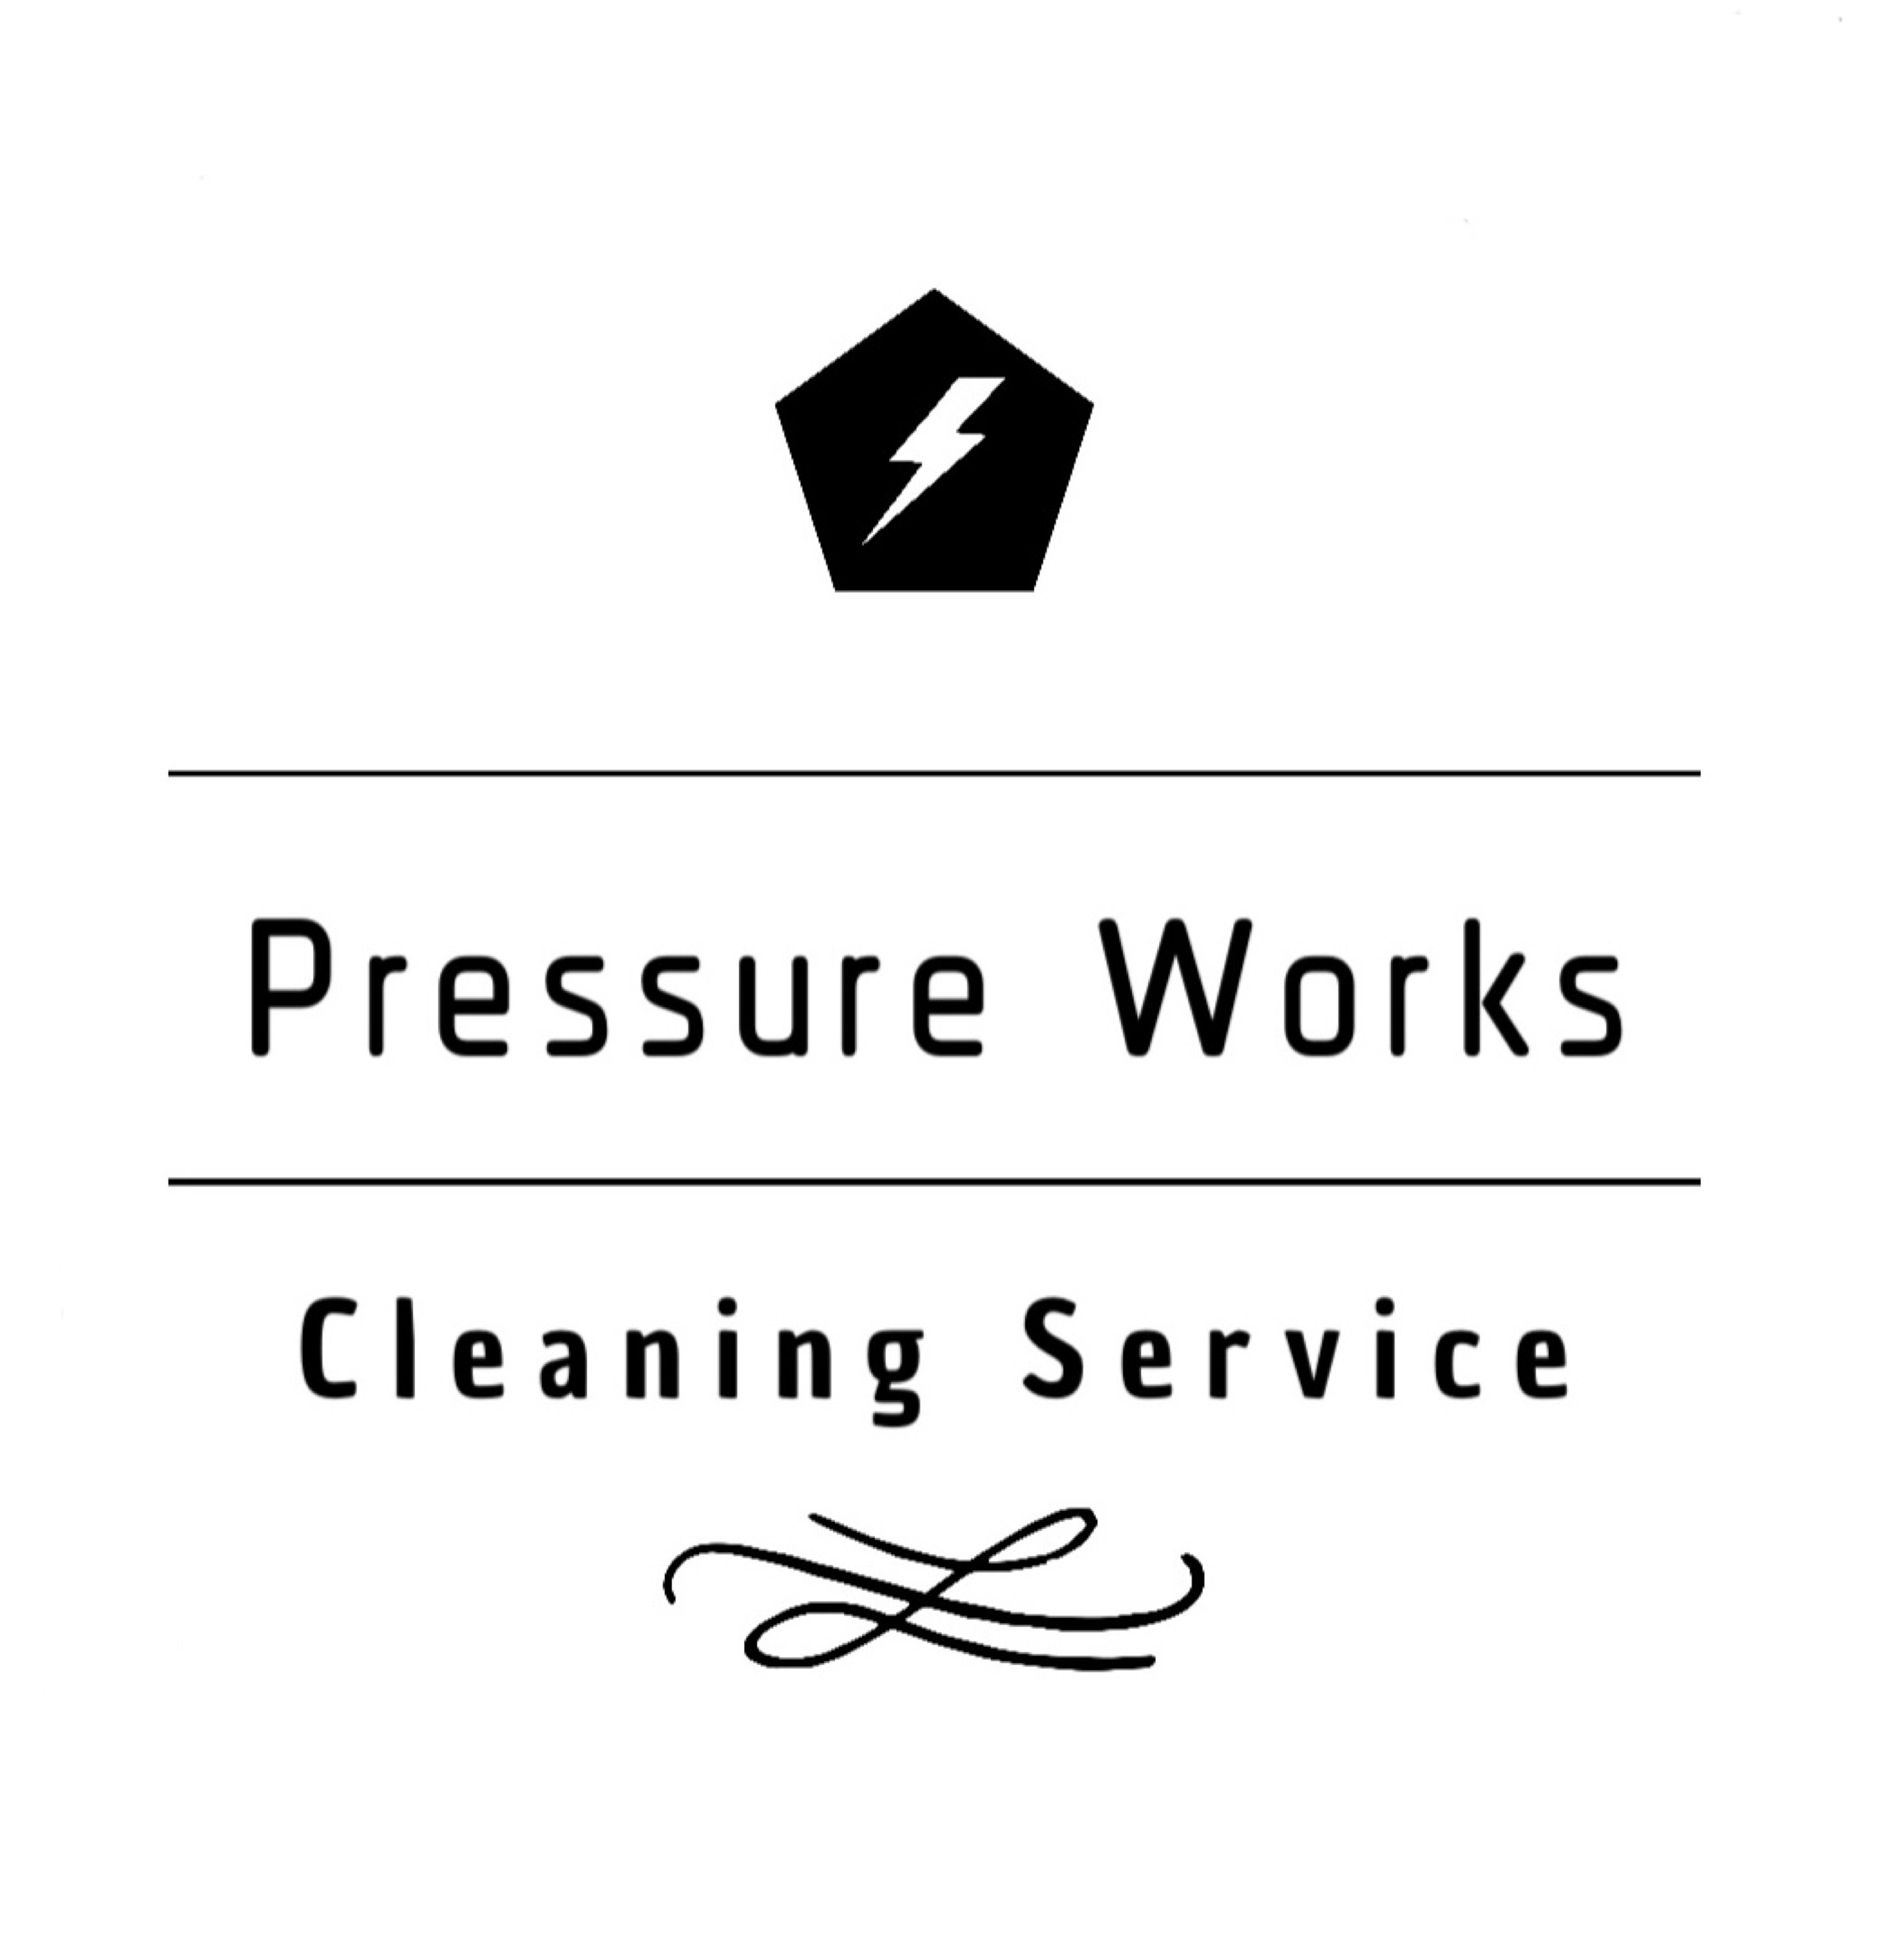 Pressure Works Cleaning Service Logo